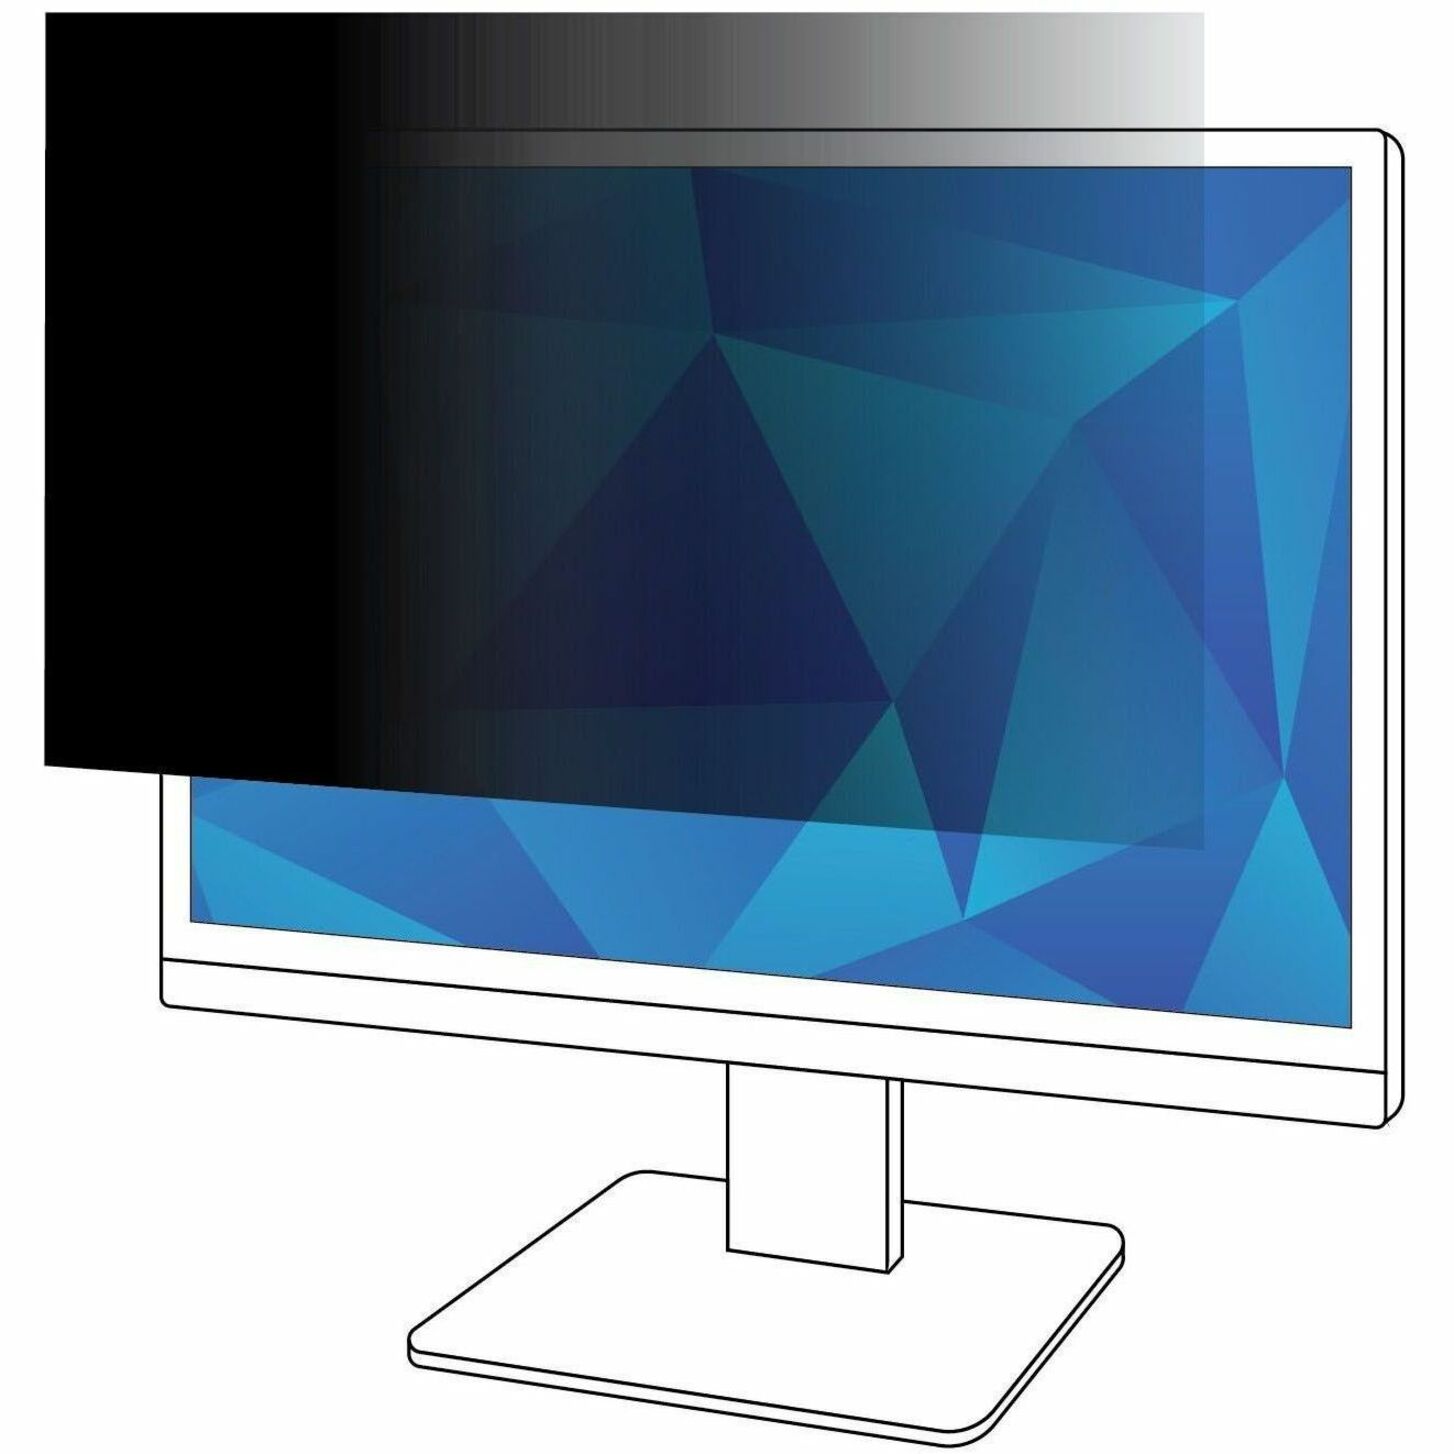 3M PF190C4B Privacy Filter Black Matte, Easy to Apply, Easy Clean, Limited Viewing Angle, 19" Monitor